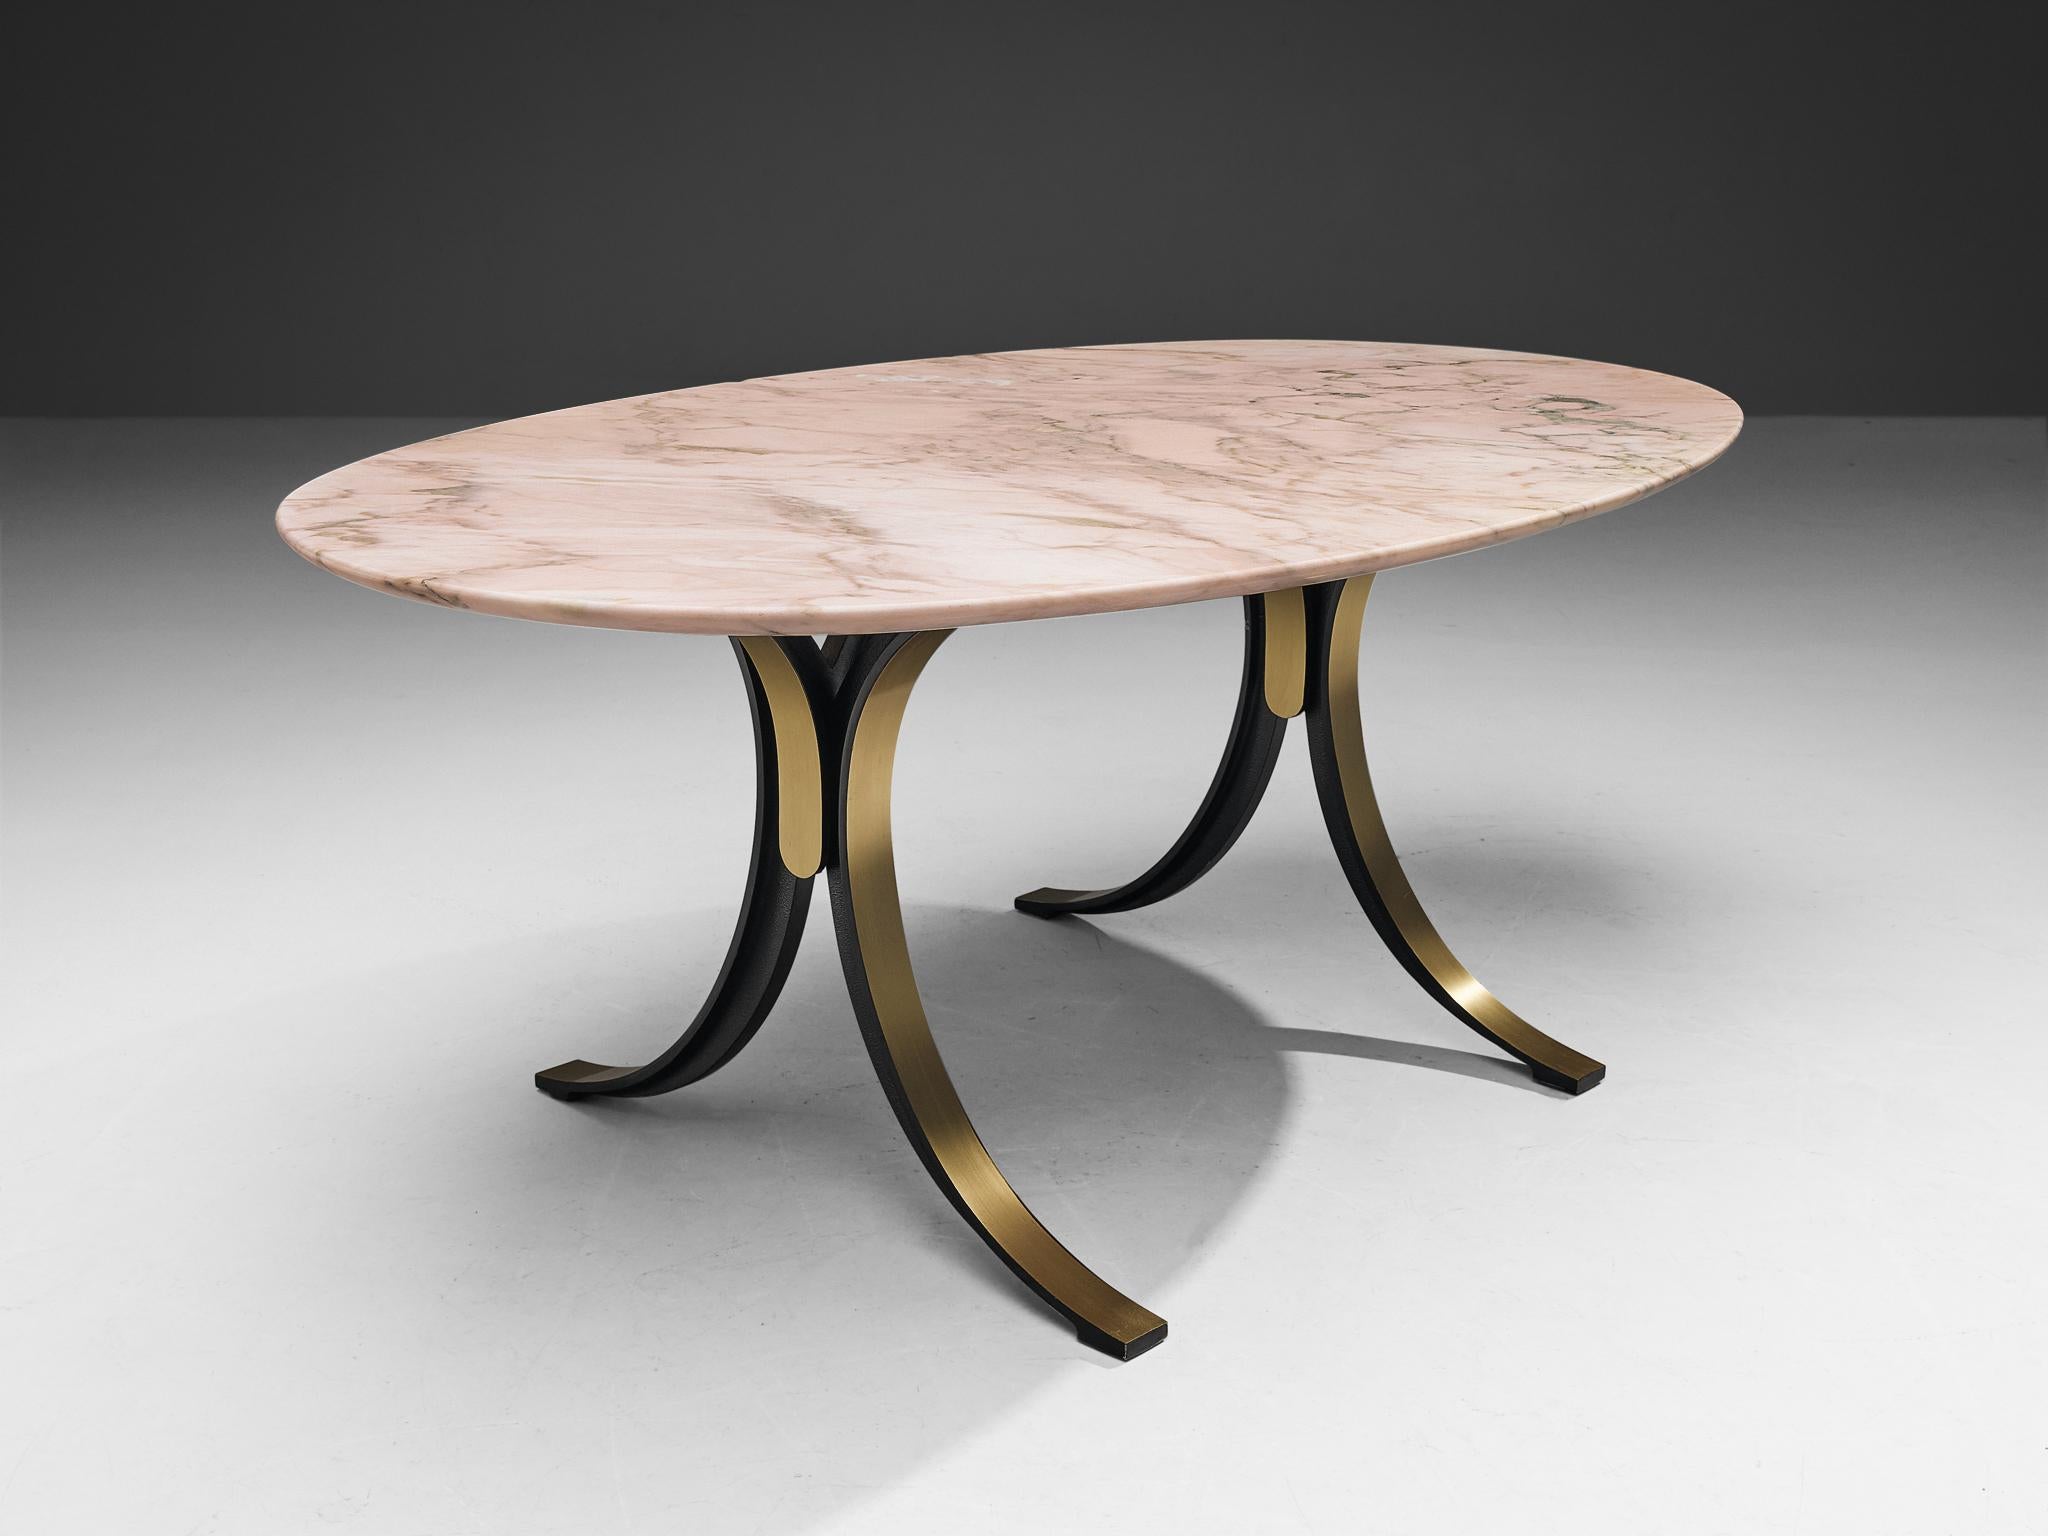 Osvaldo Borsani and Eugenio Gerli for Tecno, dining table 'T102', lady onyx marble, brass-plated steel, Italy, 1964

The designers Borsani and Gerli created an outstanding piece of furniture together that deserves a prominent place in one's living